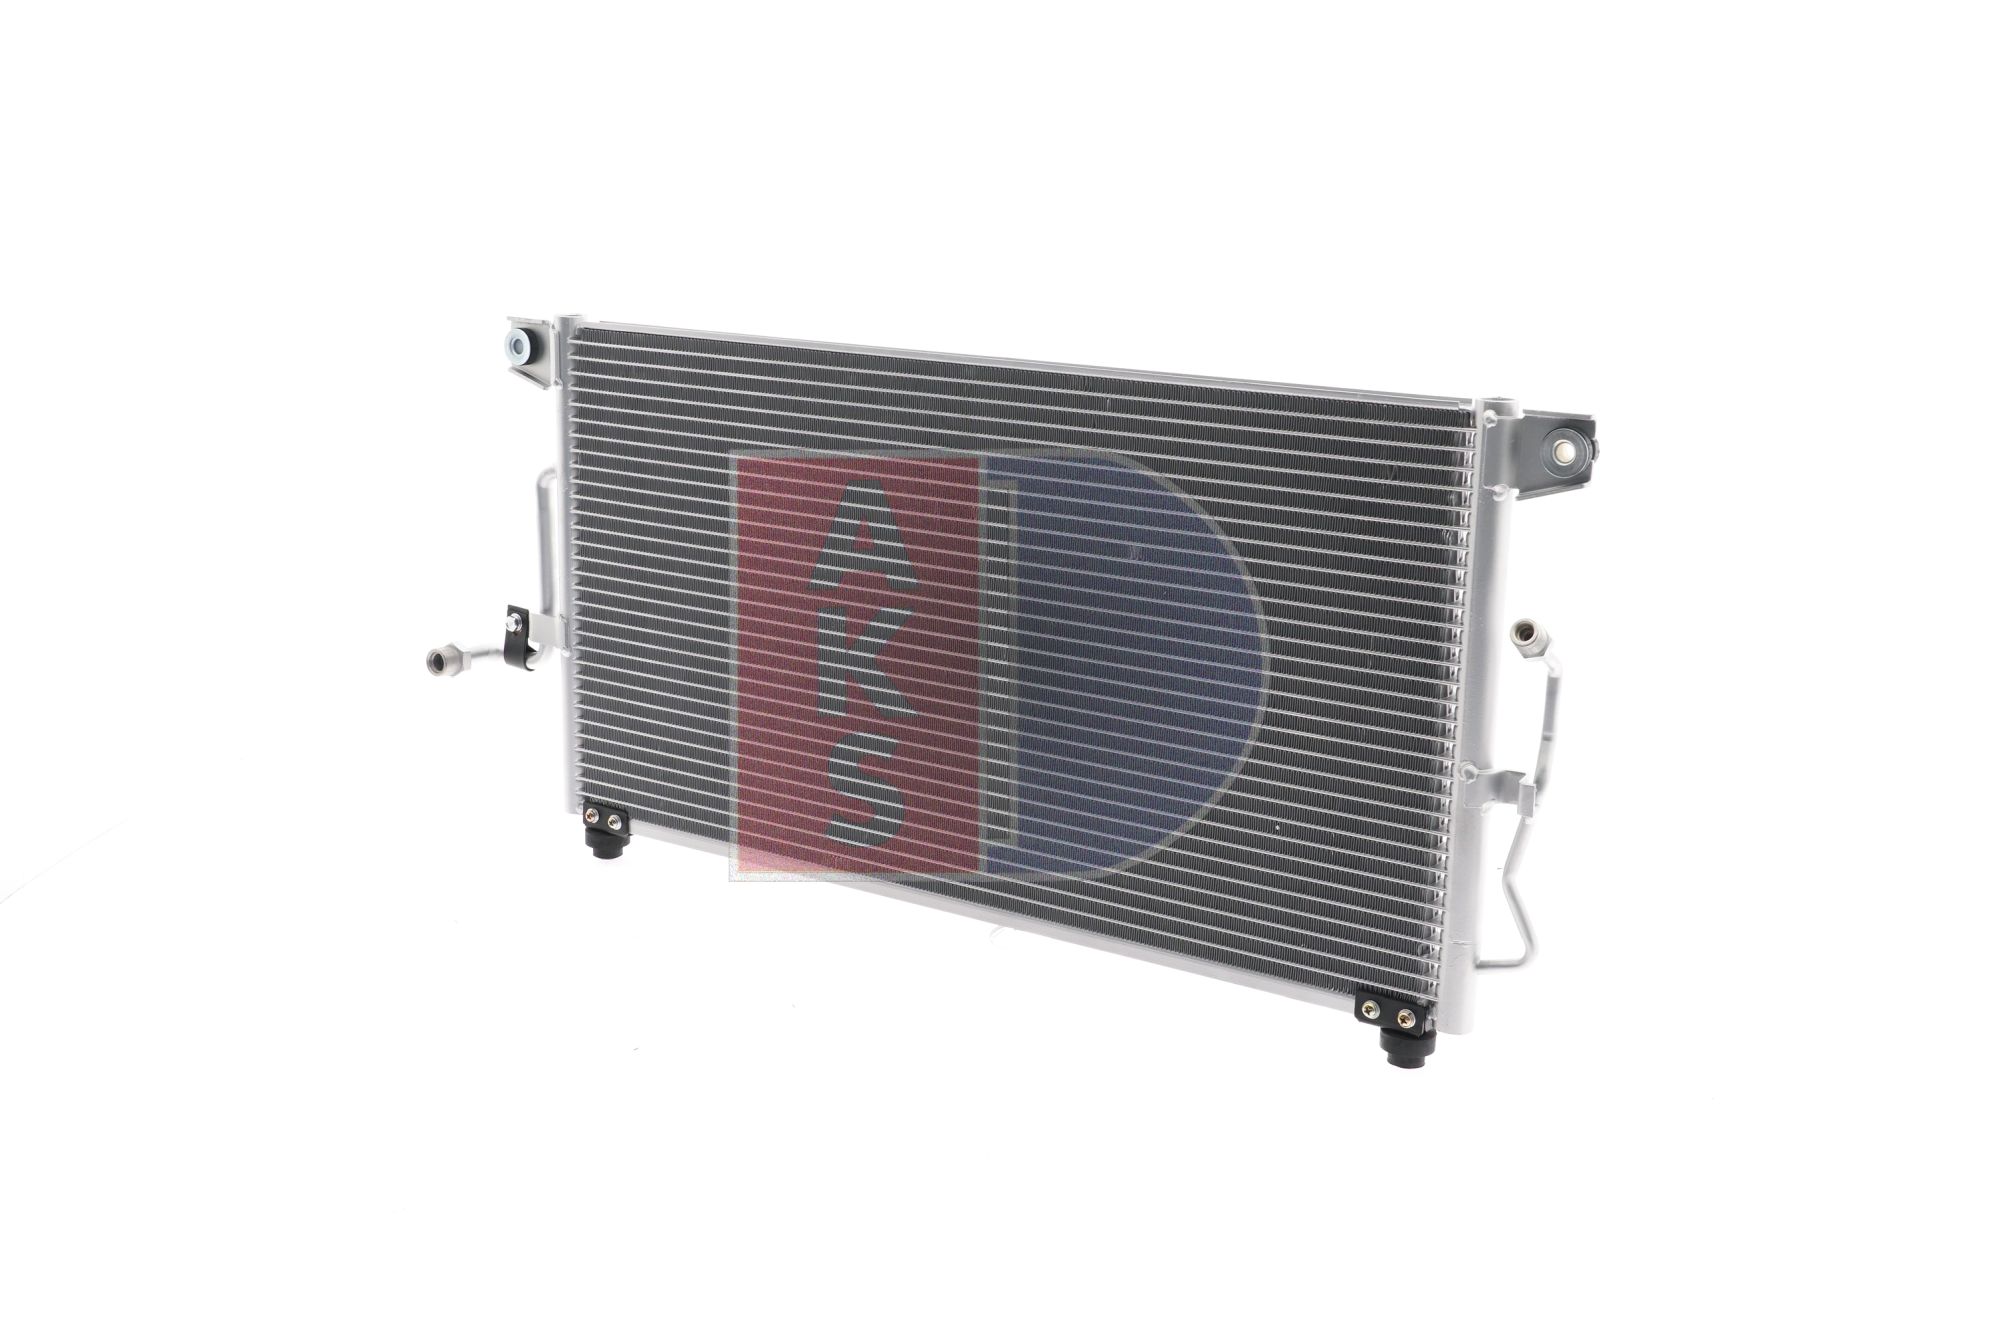 AKS DASIS 142040N Air conditioning condenser MITSUBISHI experience and price